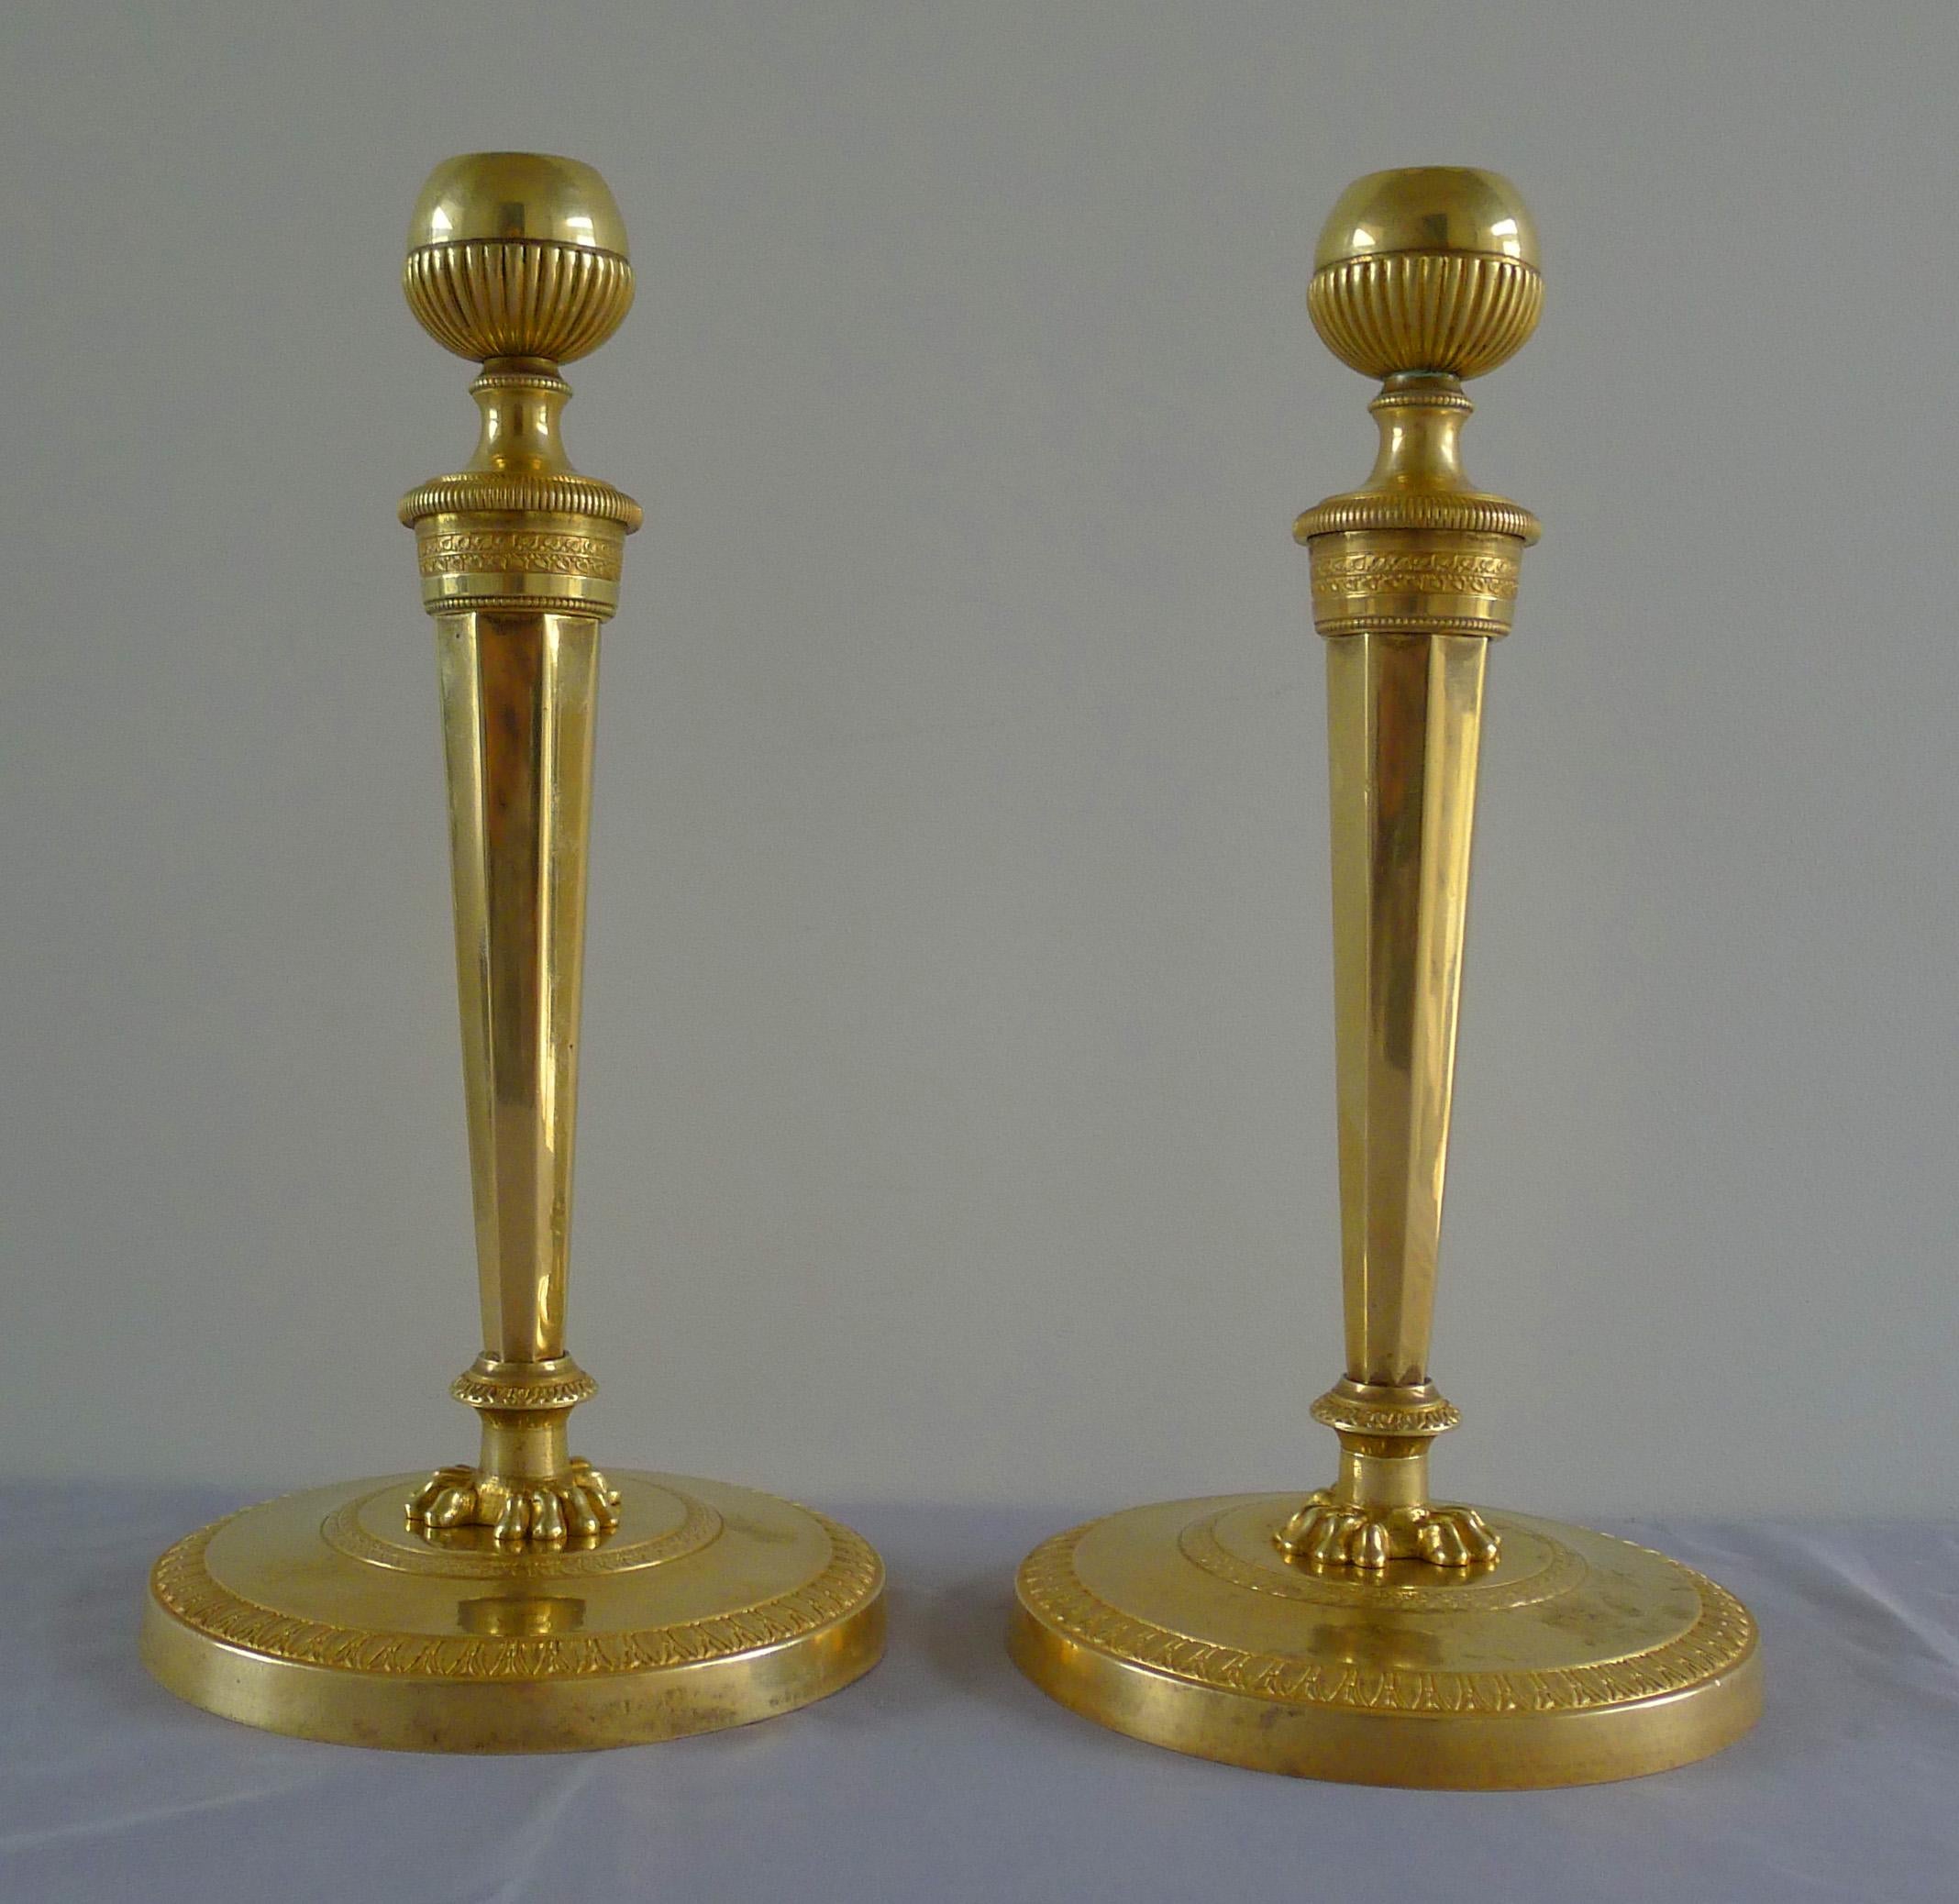 Early 19th Century French Empire Pair of Ormolu Candlesticks with Original Handcut Threads For Sale